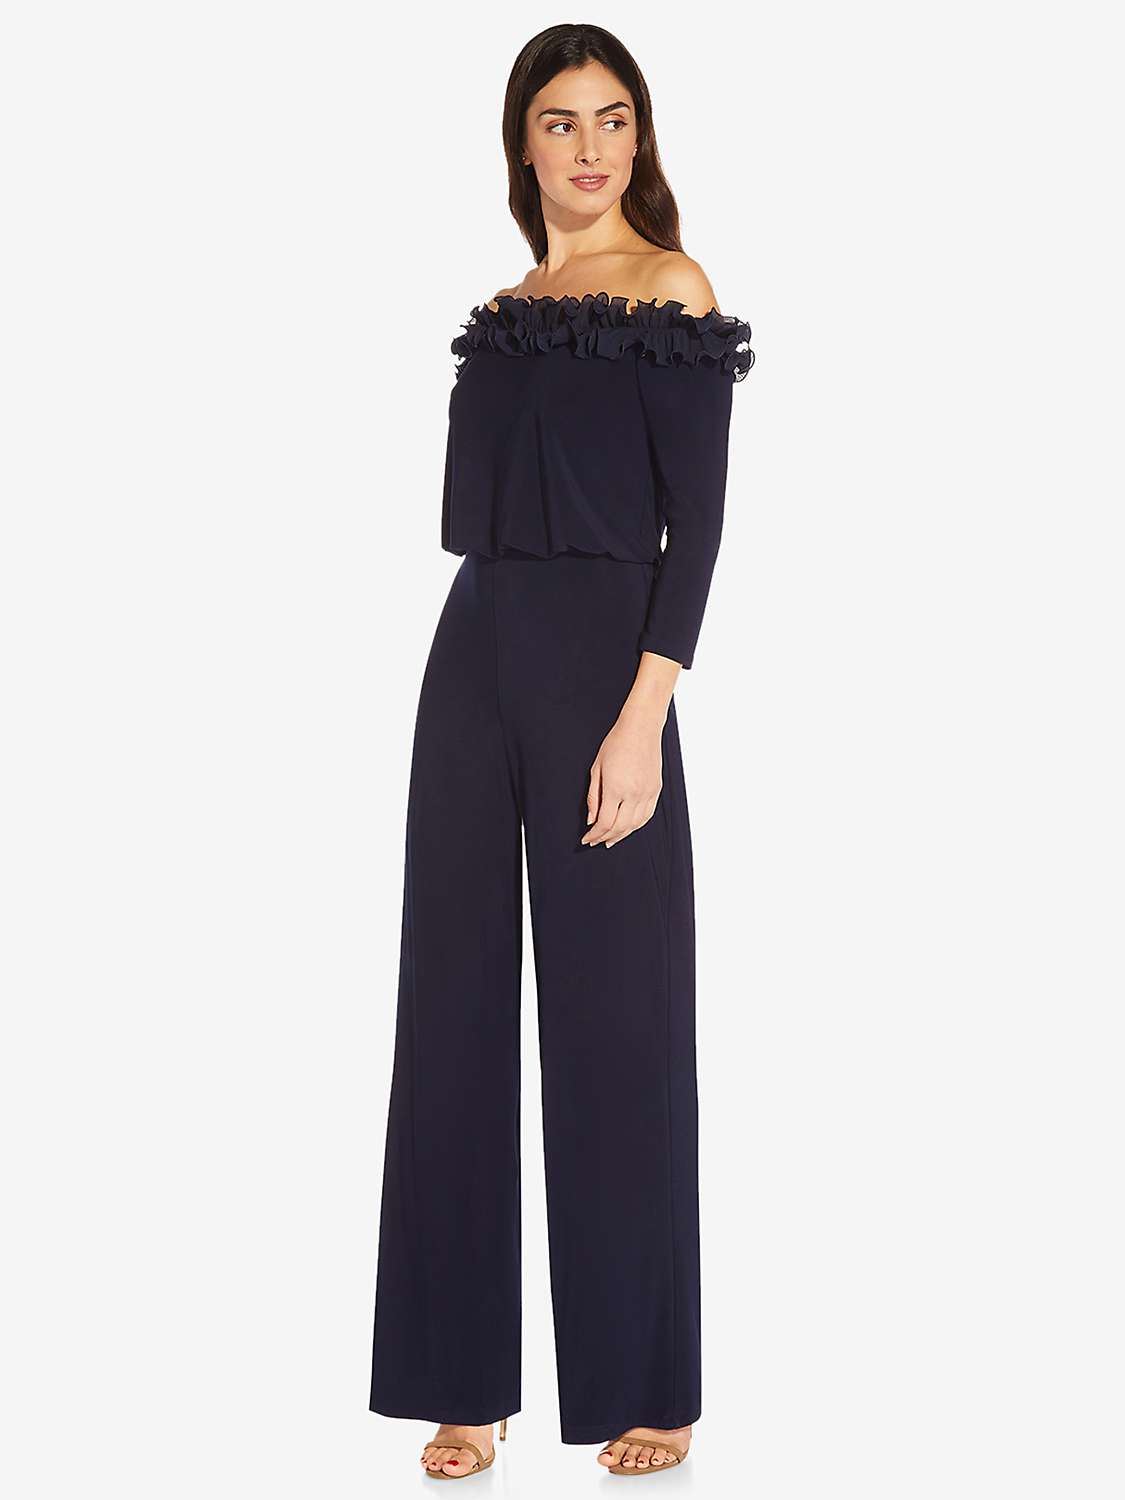 Buy Adrianna Papell Ruffled Blouson Jumpsuit, Navy Online at johnlewis.com